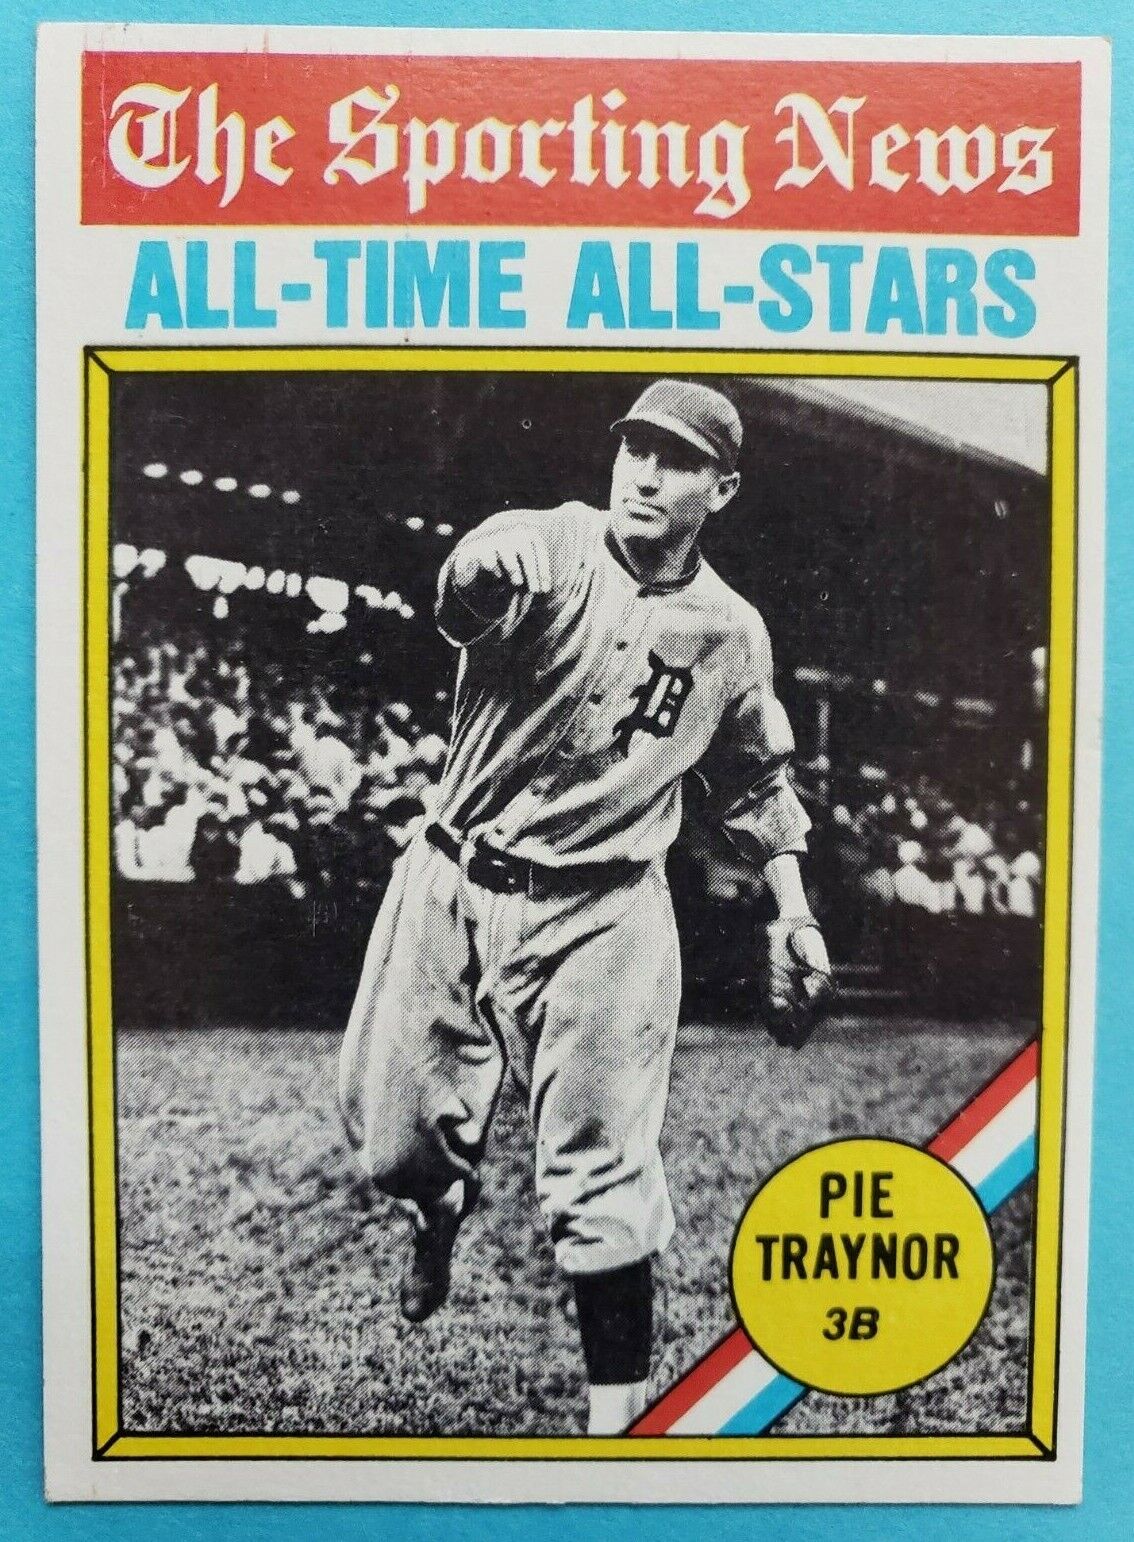 1976 Topps #343 PIE TRAYNOR ALL-TIME ALL-STARS Pittsburgh Pirates 